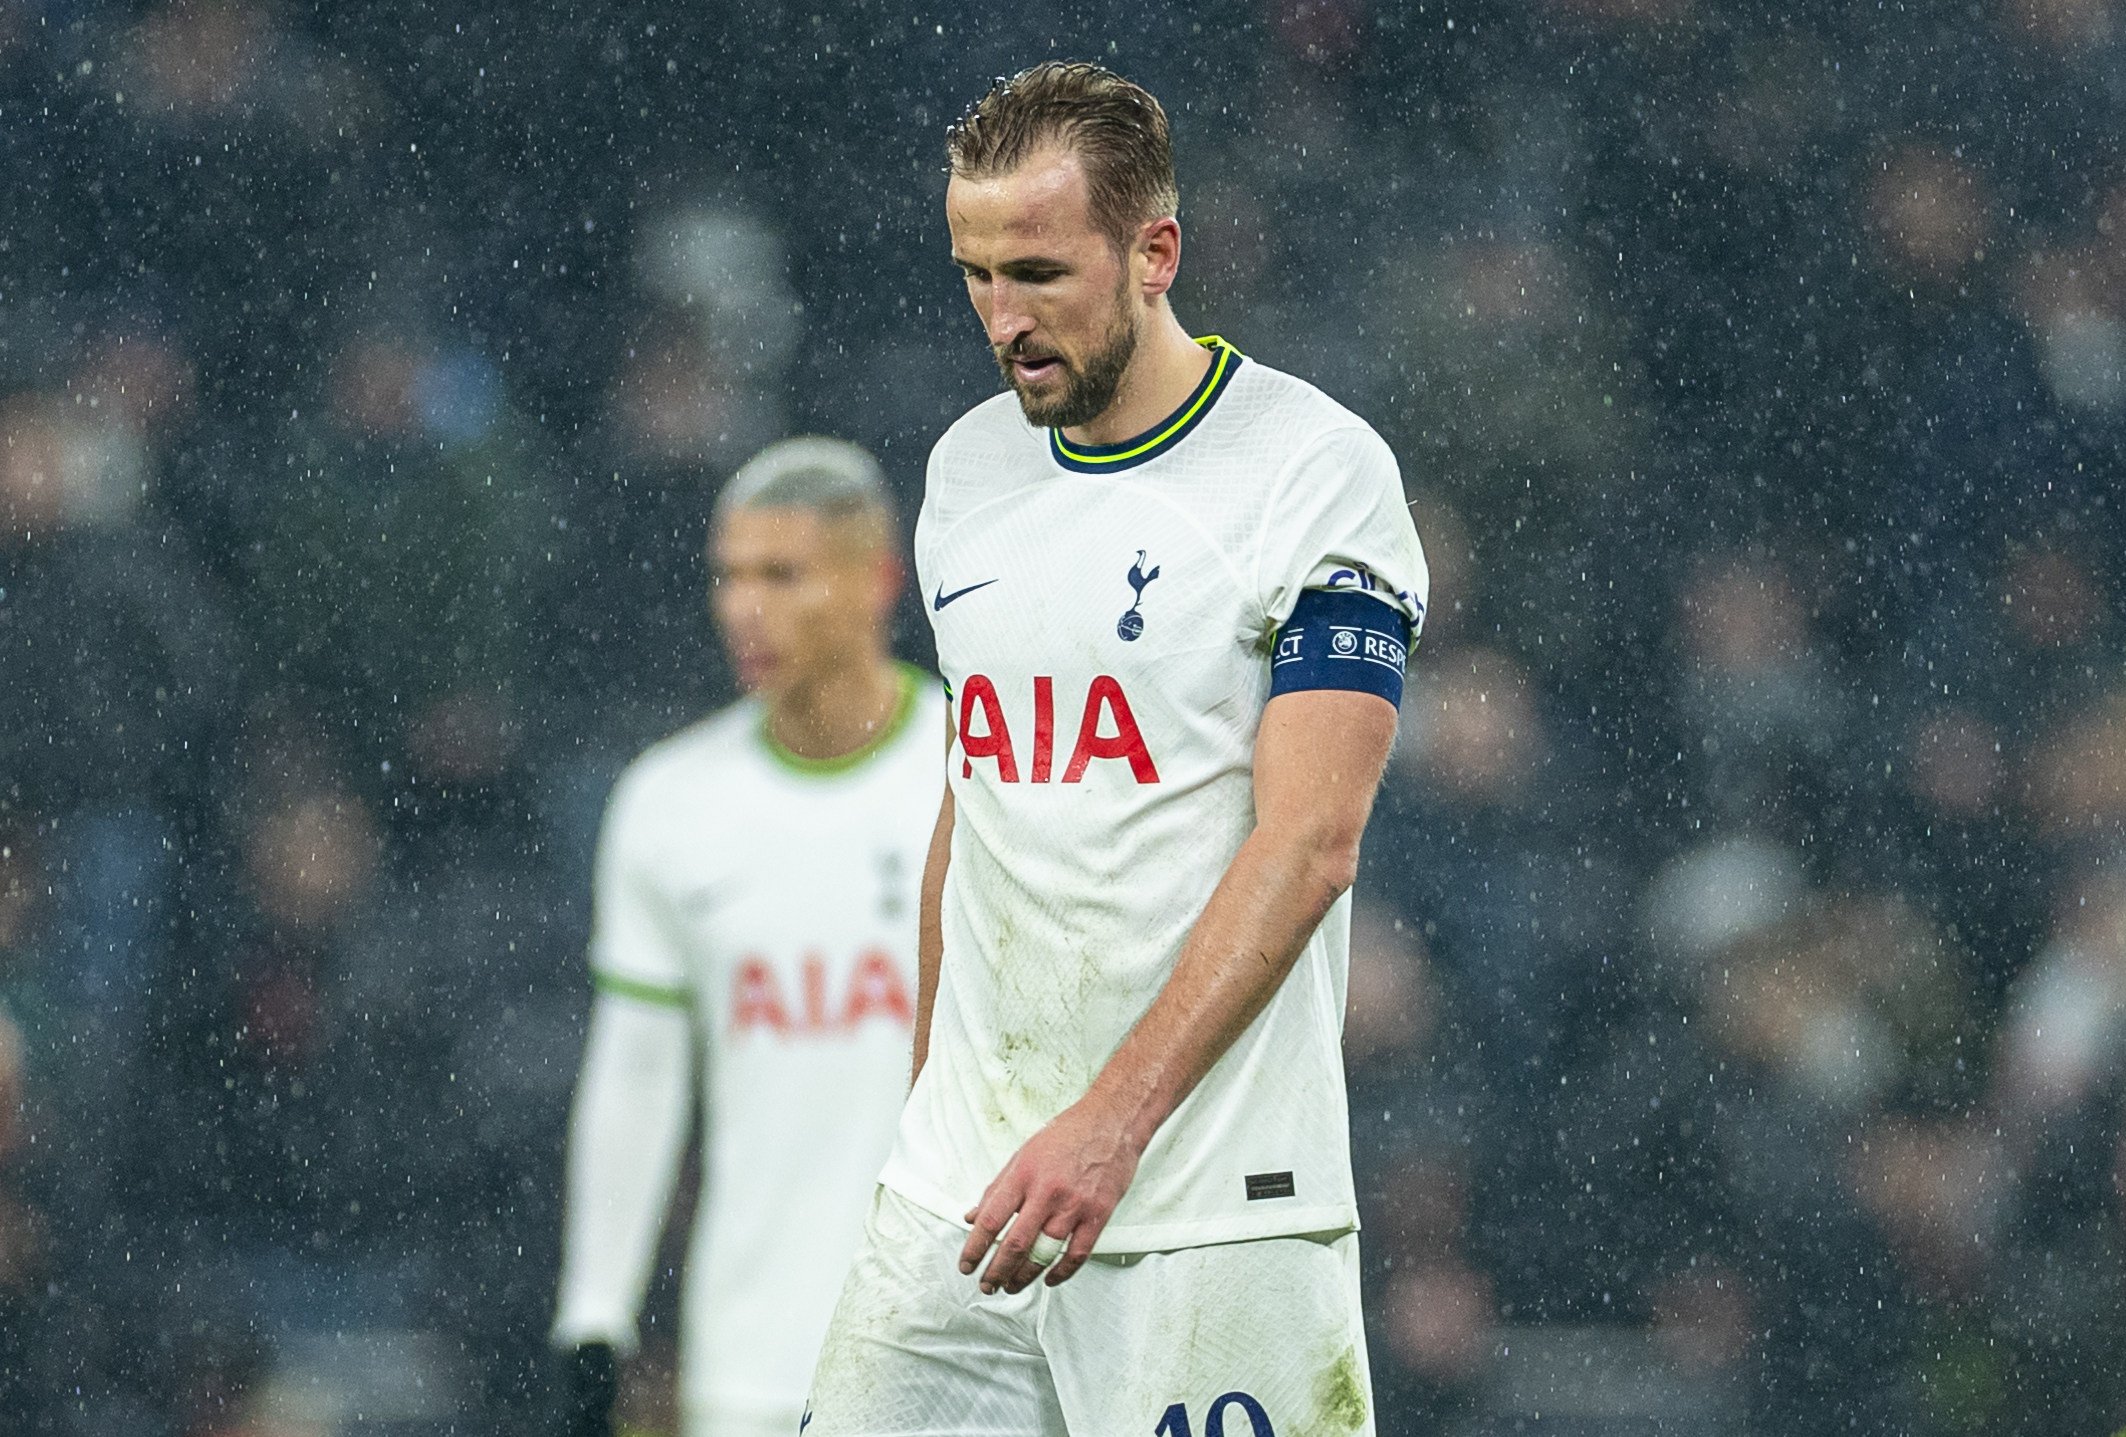 Tottenham Hotspur’s Harry Kane looks dejected after their Uefa Champions League exit. Photo: Xinhua